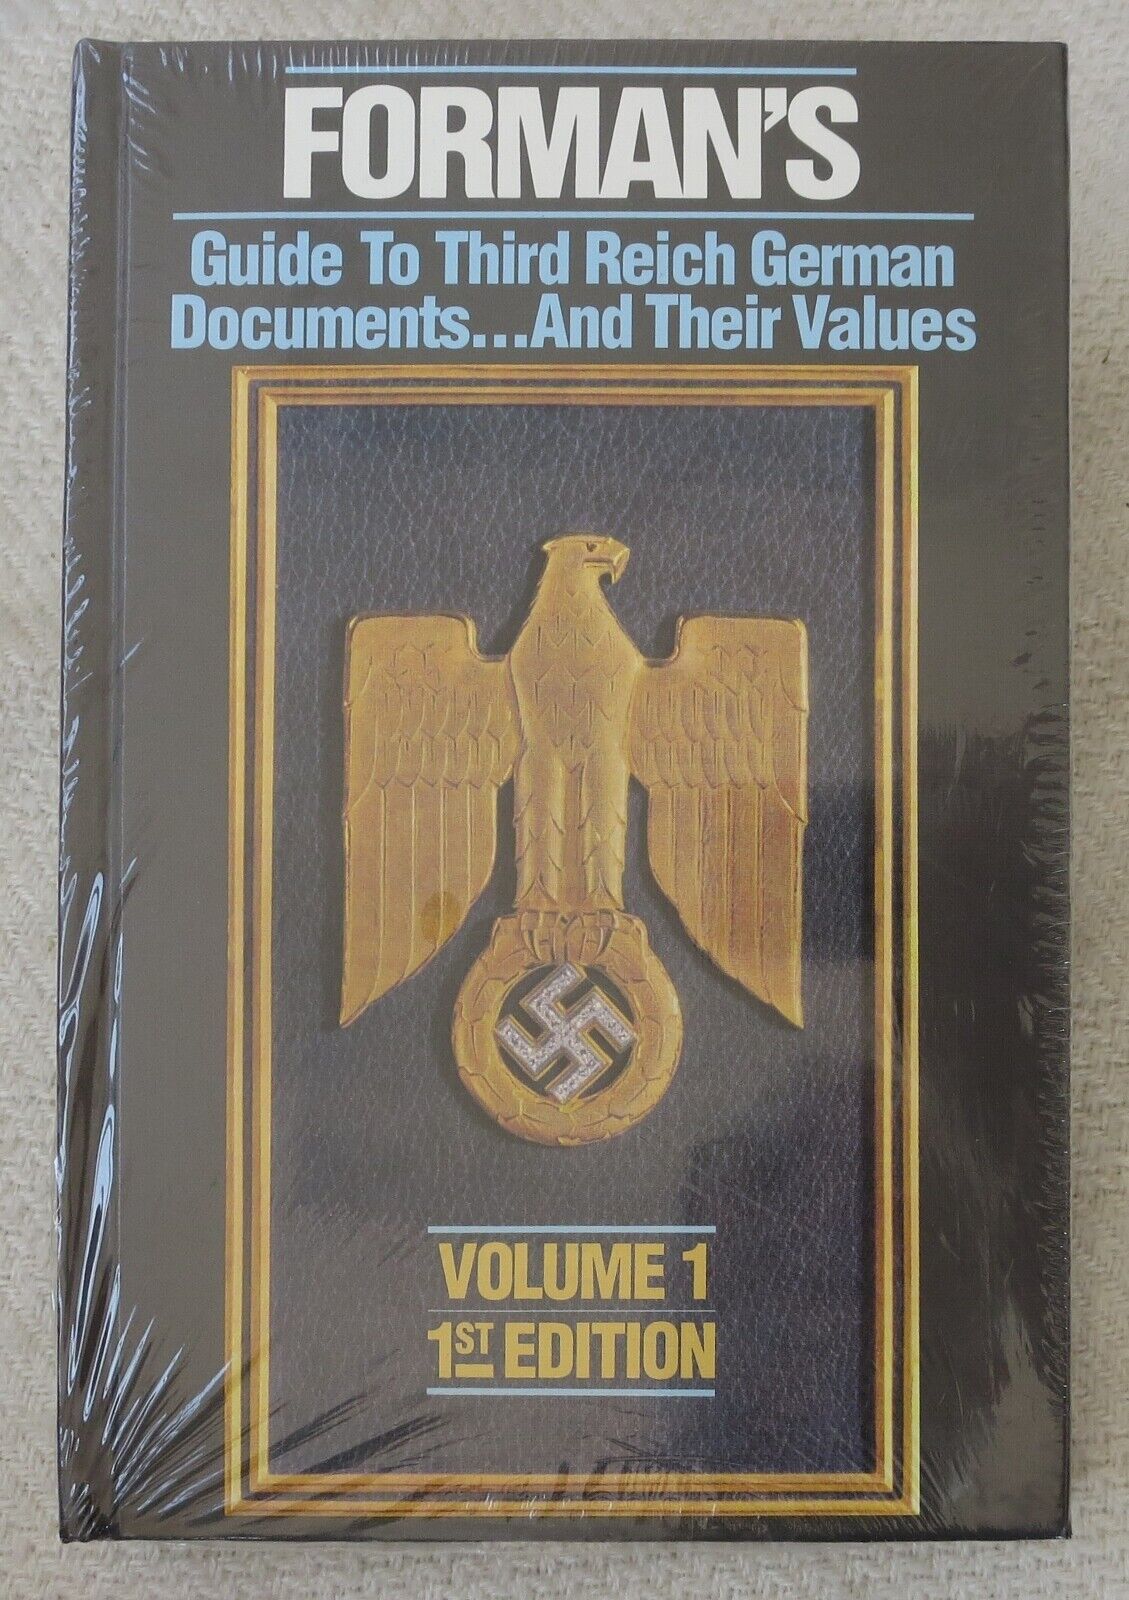 BENDER WW2 Reference BOOK FORMANS GUIDE 3rd REICH GERMAN DOCUMENTS, VALUES Vol 1